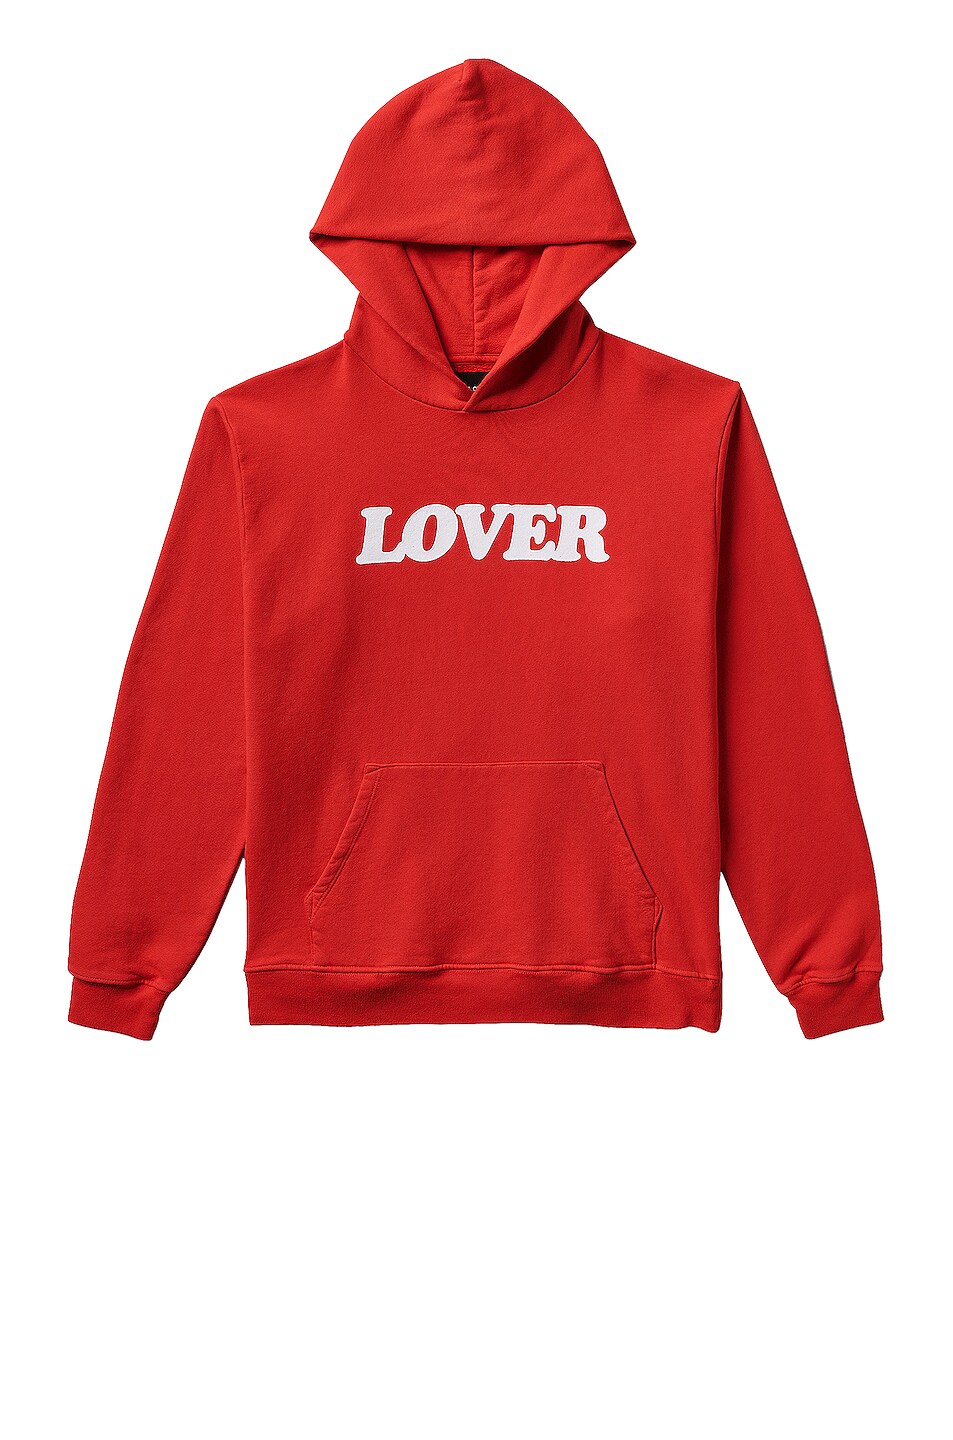 Image 1 of Bianca Chandon Lover 10th Anniversary Pullover Hoodie in Red